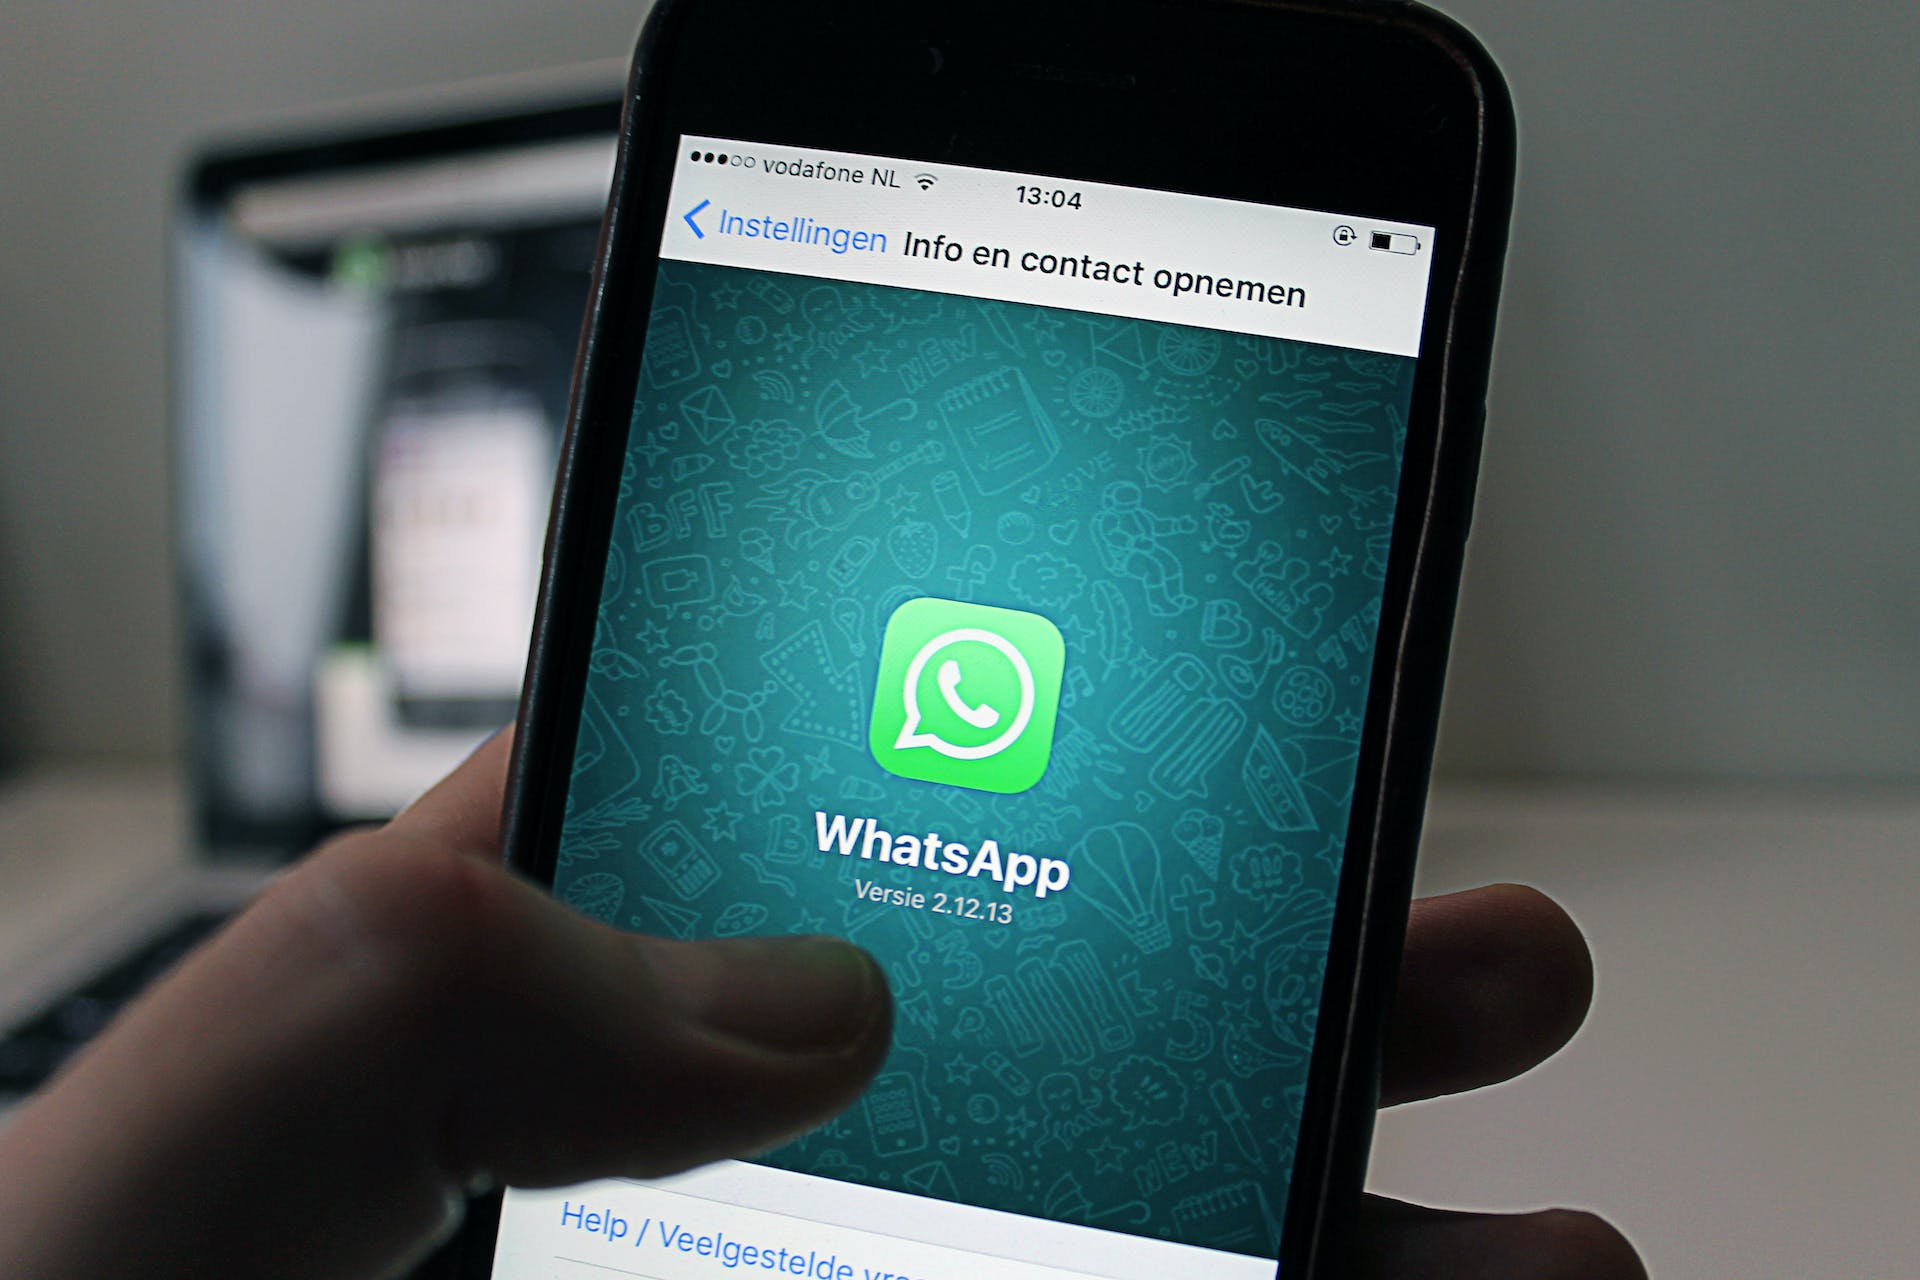 How to install WhatsApp on 2 devices with same number